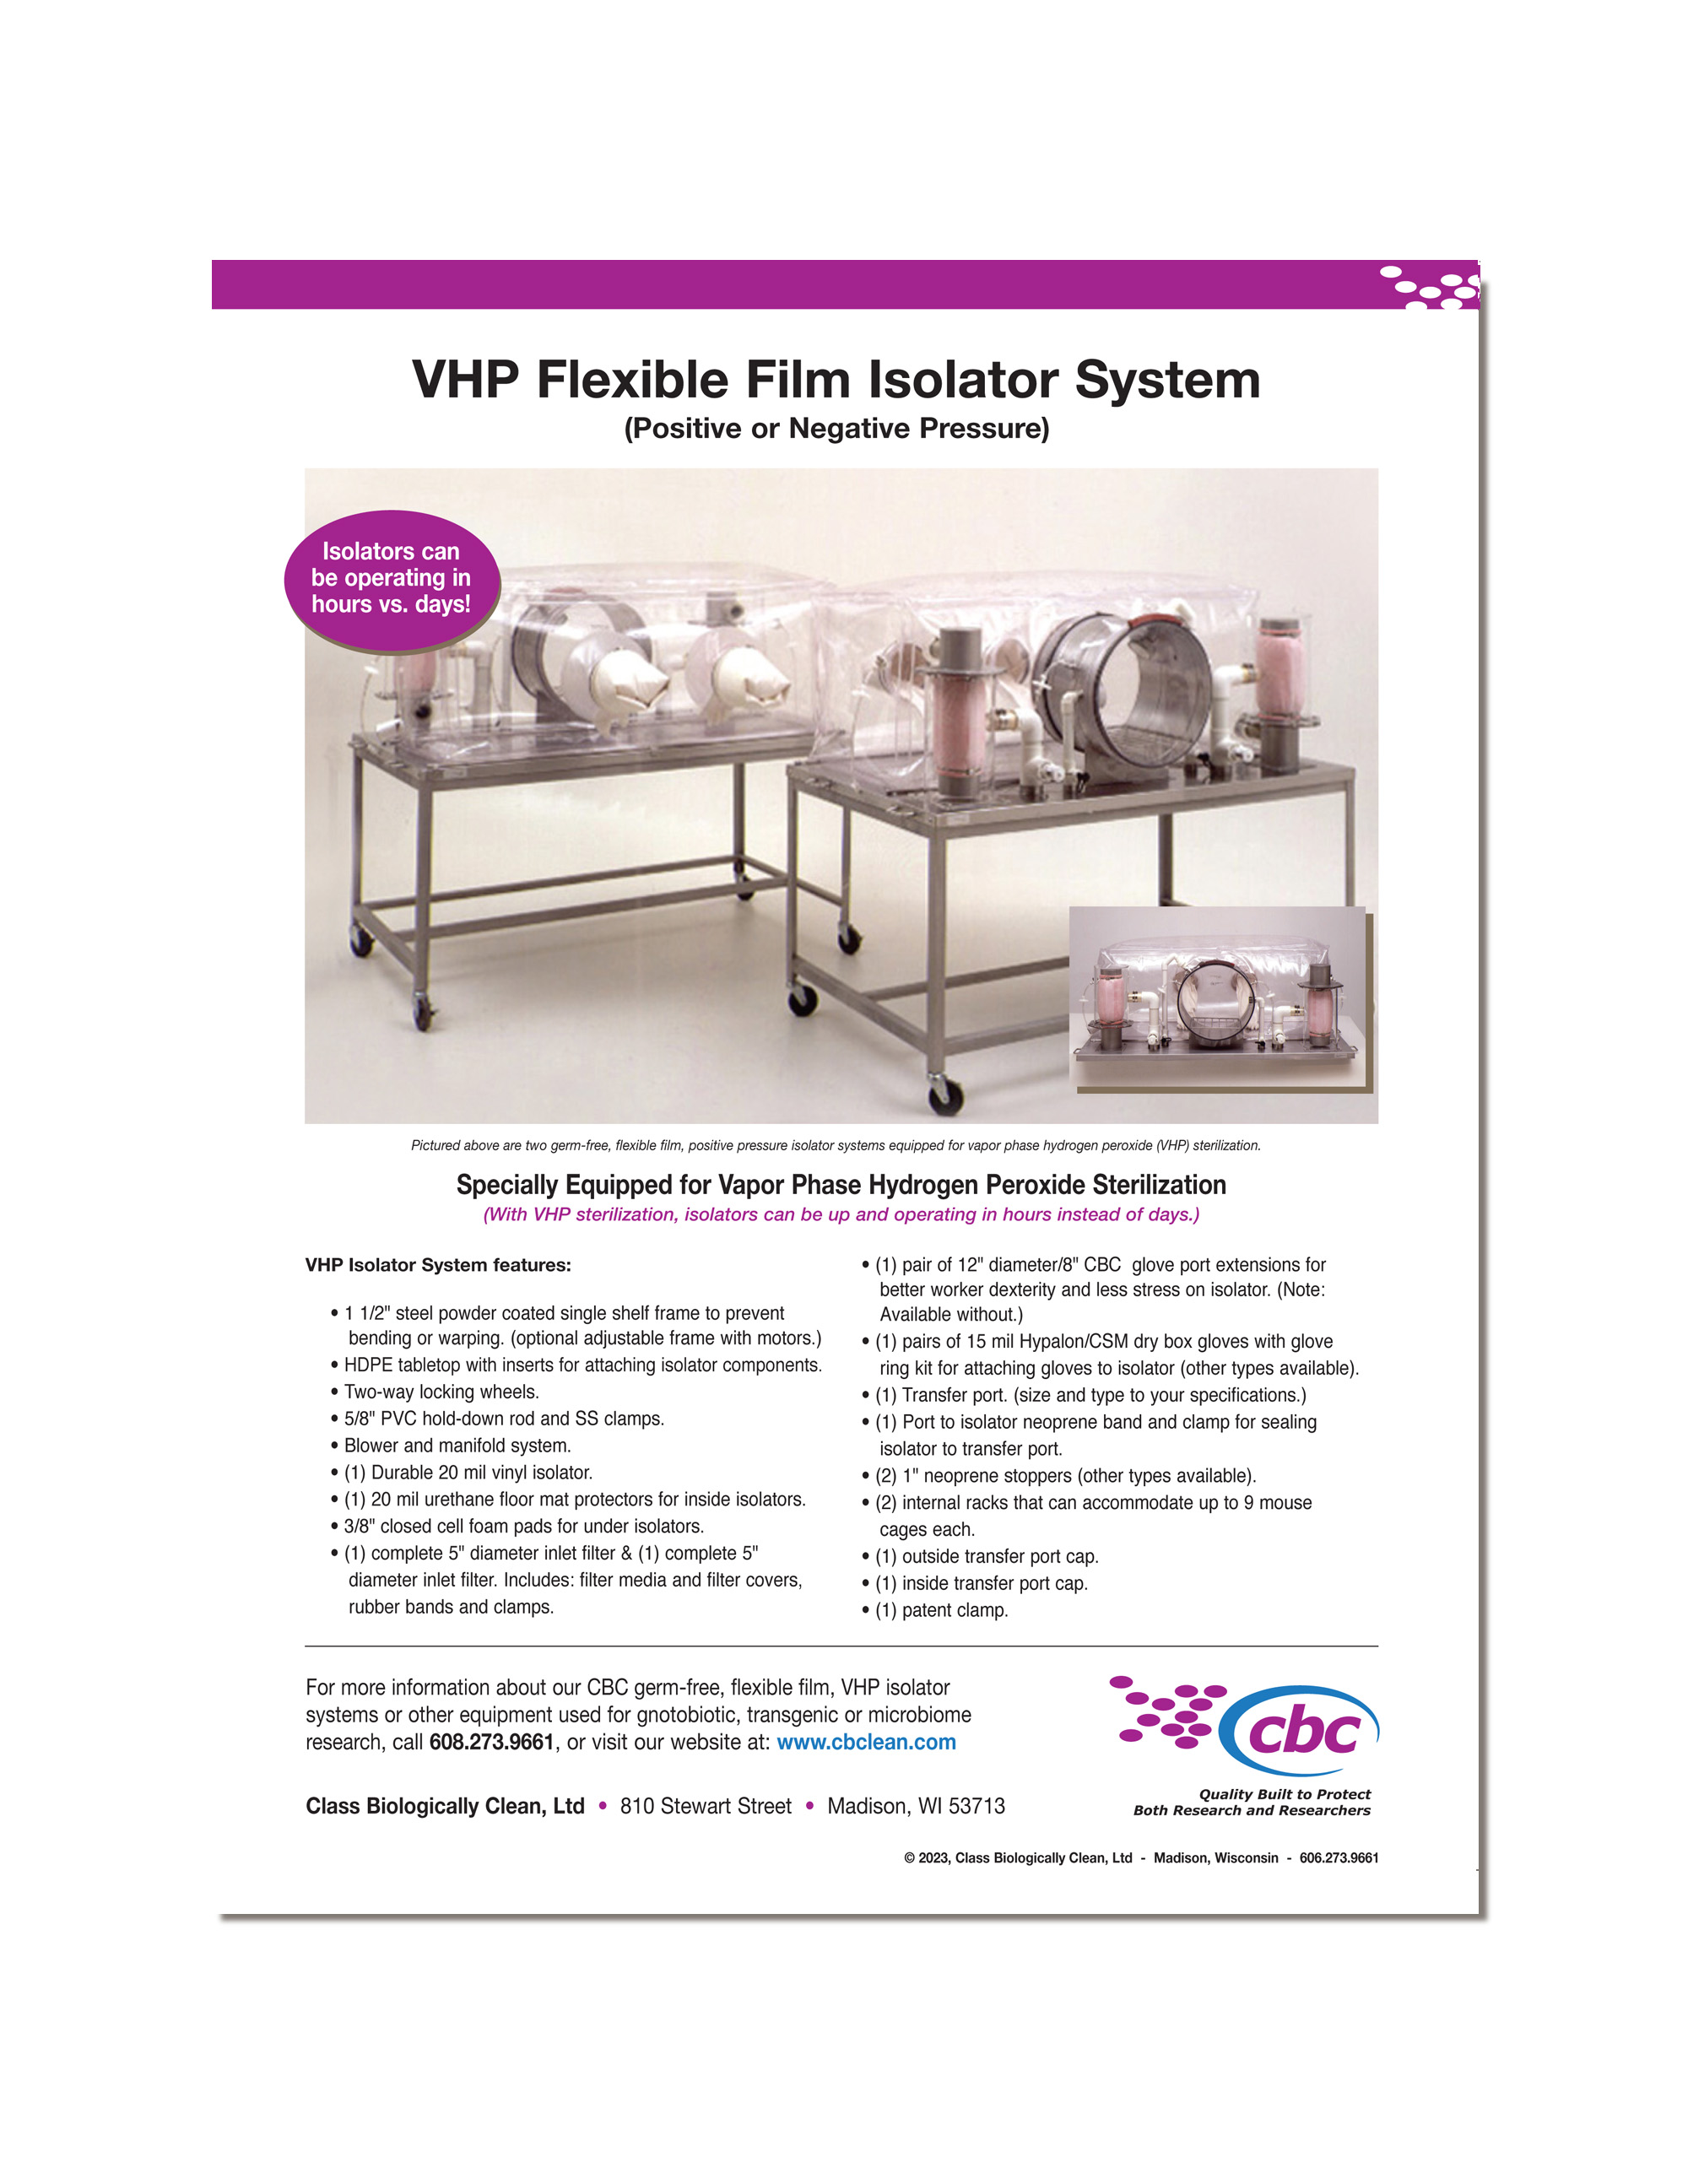 Download a printable flyer about CBC's positive pressure, flexible film, VHP isolator for conducting research on gnotobiotic mice and other rodents. Click here to download flyer.